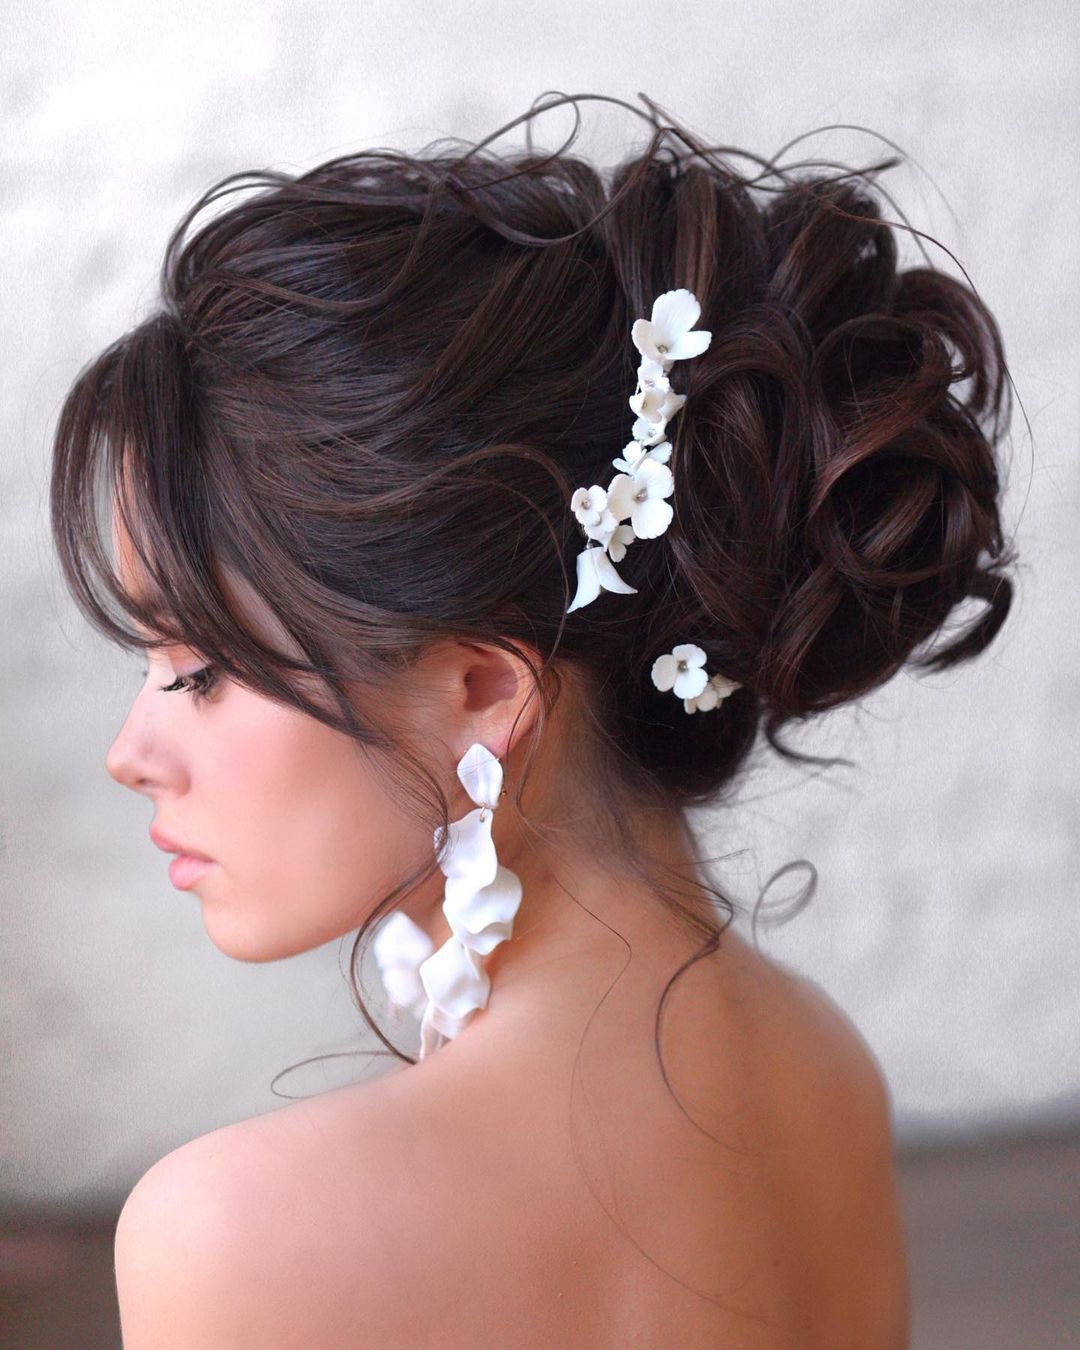 wedding hairstyles with bangs relaxed upstyle brunette hair loose curls hair_vera